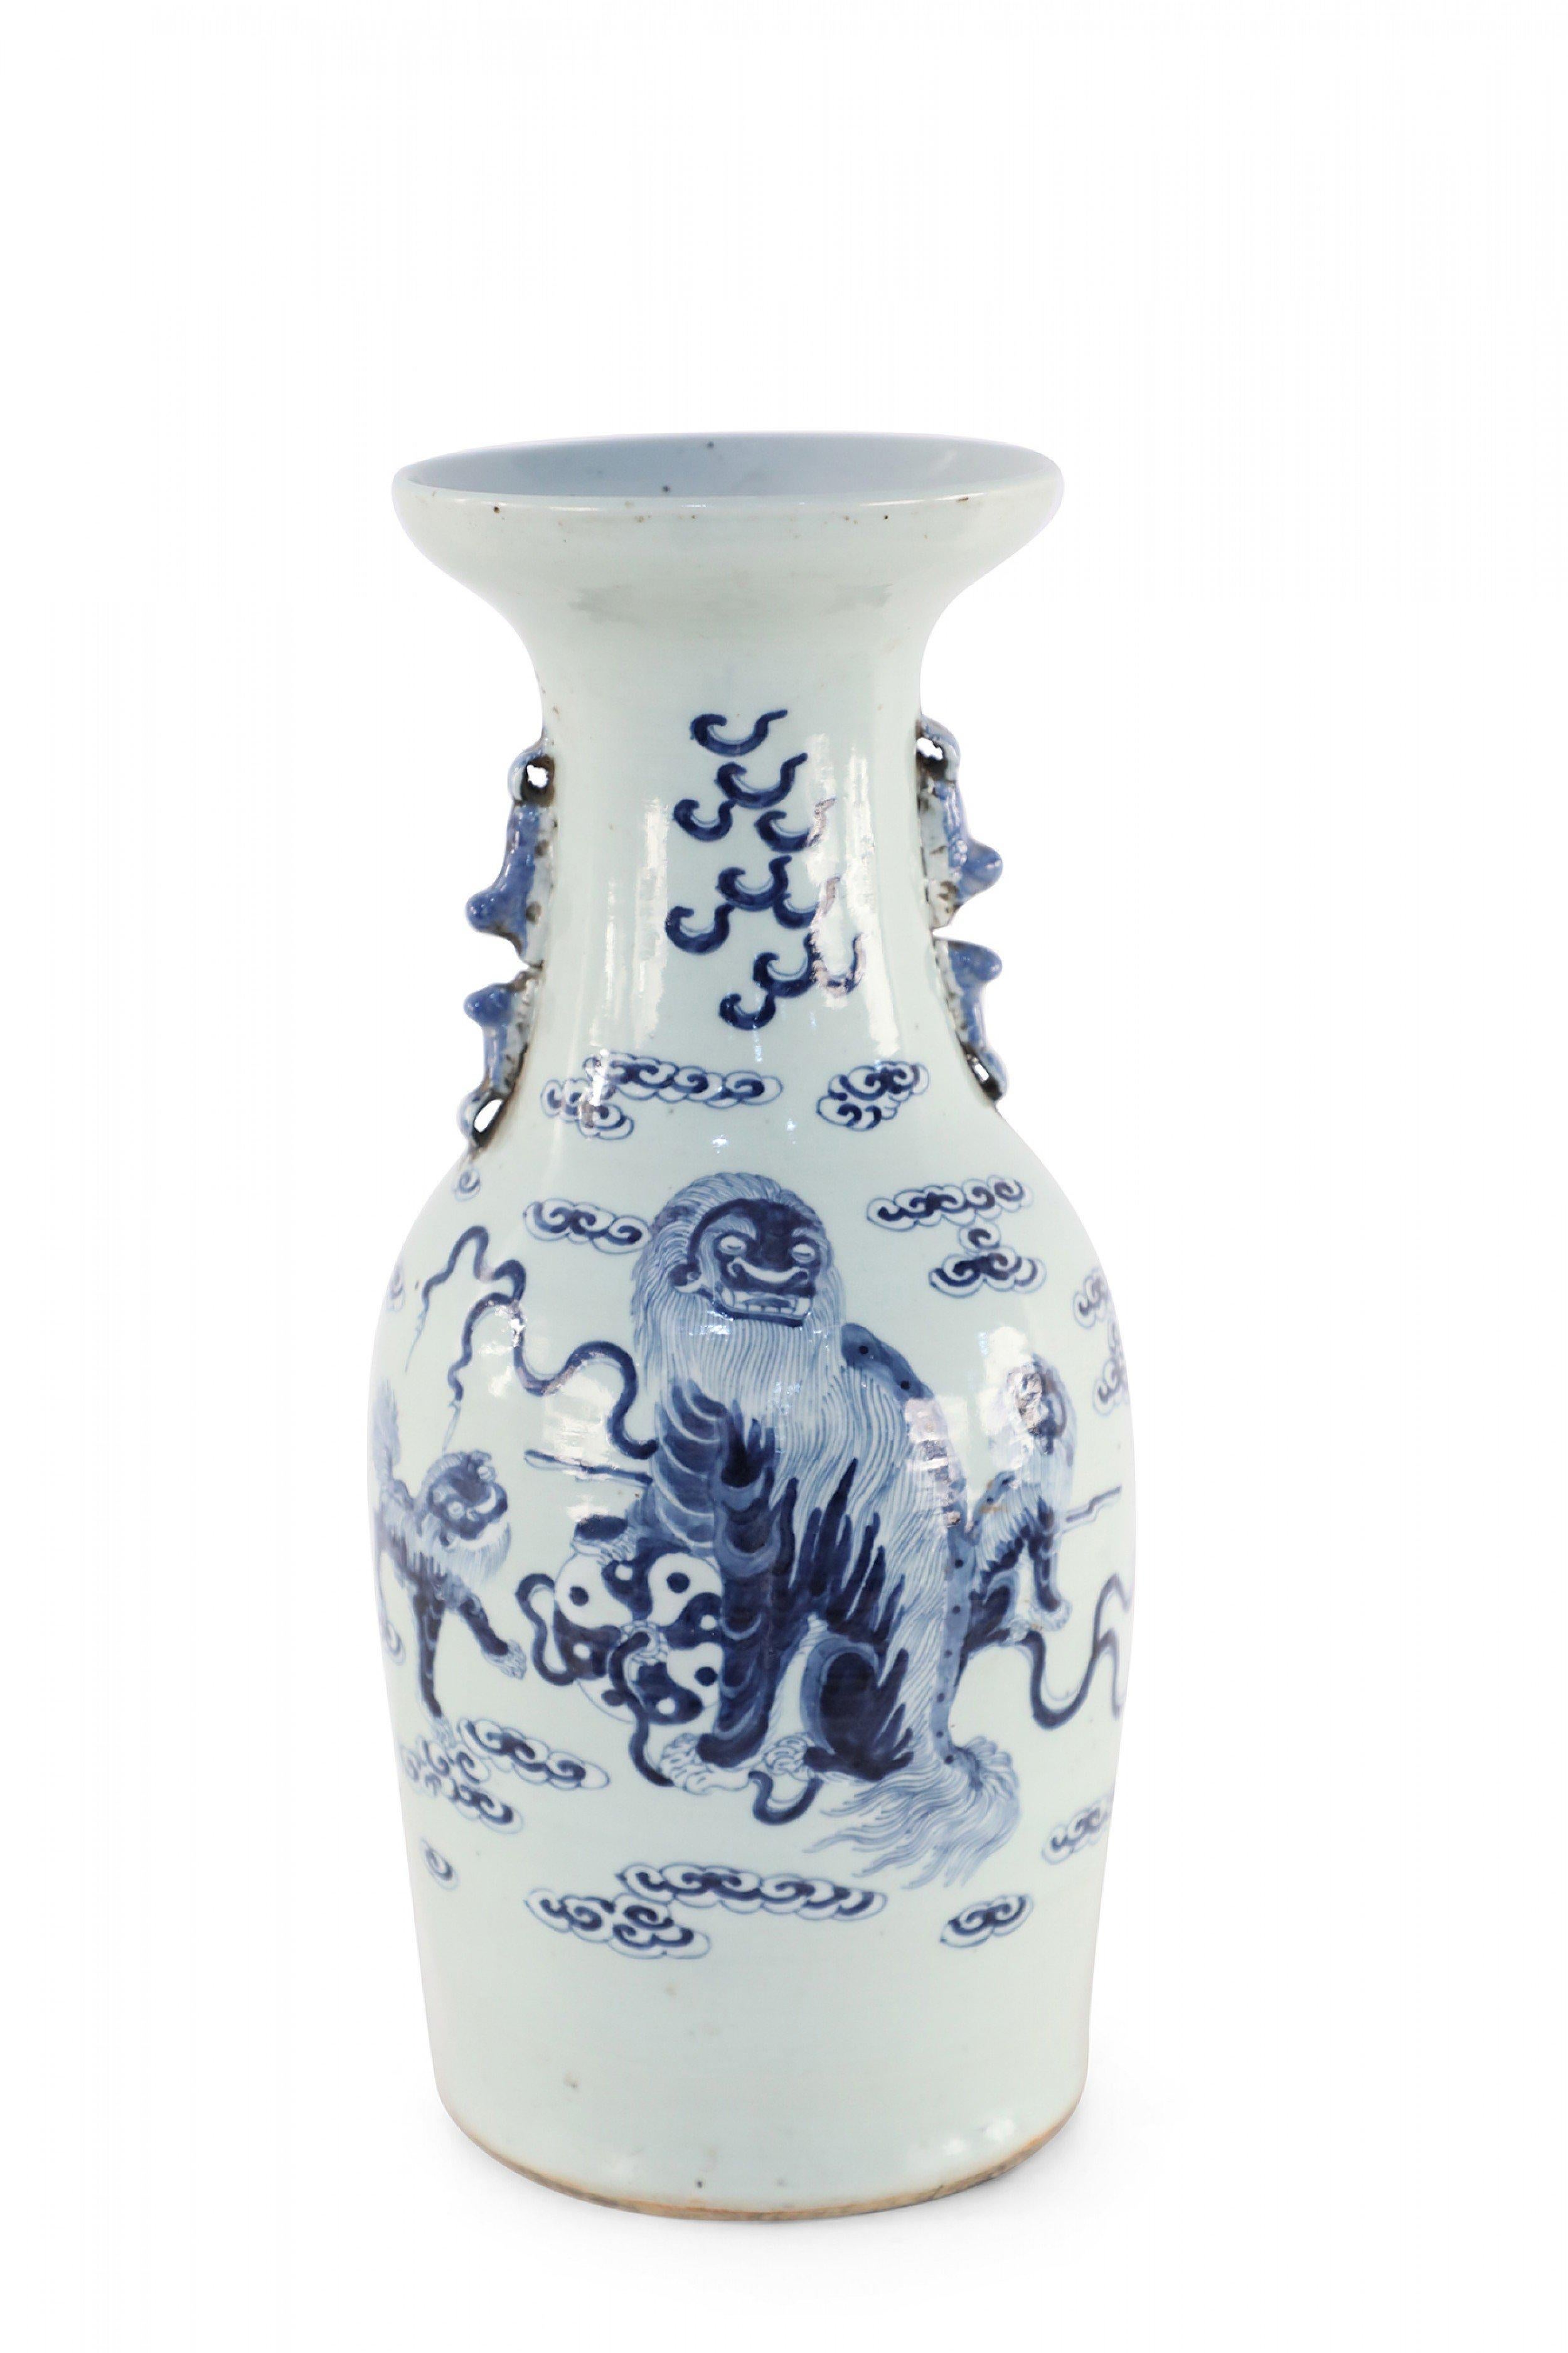 Antique Chinese (Late 19th century) white porcelain urn decorated with blue foo dogs, clouds, and serpents, and accented in two pale blue scrolled handles along the neck.
   